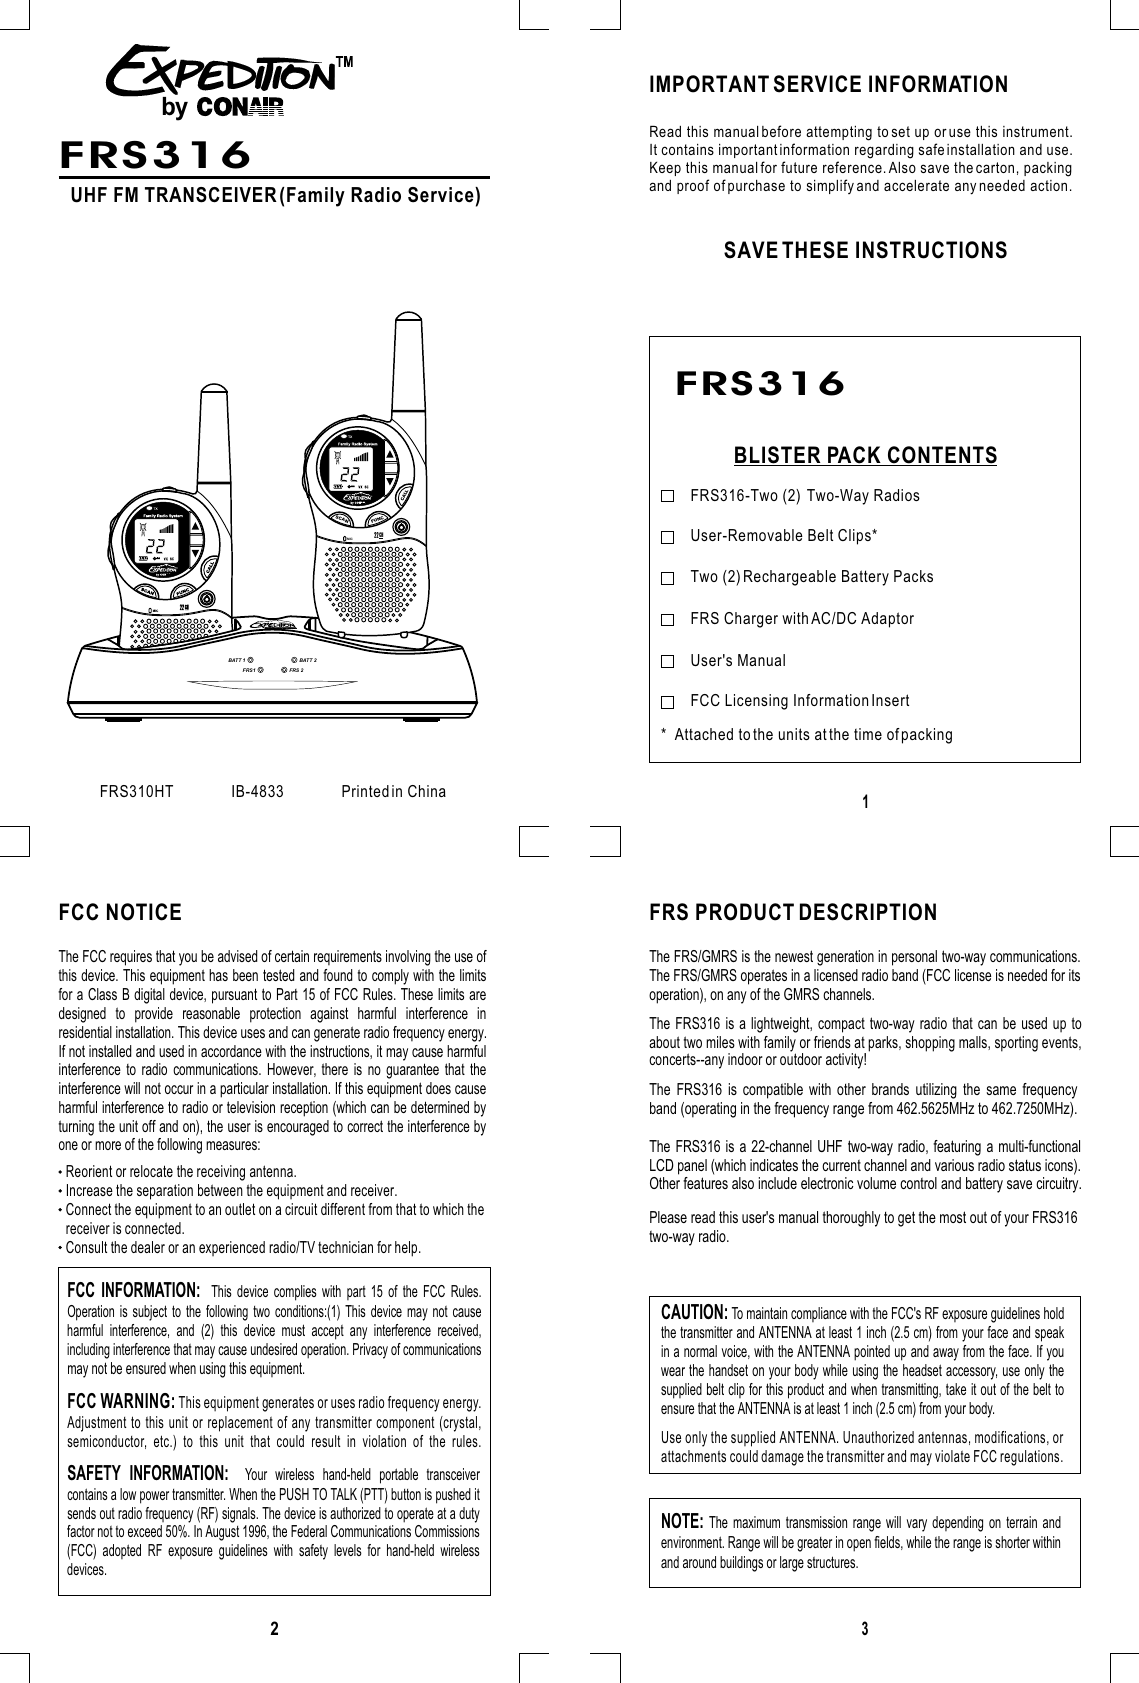 231UHF FM TRANSCEIVER (Family Radio Service)FRS310HT               IB-4833               Printed in ChinaIMPORTANT SERVICE INFORMATIONSAVE THESE INSTRUCTIONSBLISTER PACK CONTENTSRead this manual before attempting to set up or use this instrument.It contains important information regarding safe installation and use.Keep this manual for future reference. Also save the carton, packingand proof of purchase to simplify and accelerate any needed action.FRS316-Two (2)  Two-Way Radios*  Attached to the units at the time of packingUser-Removable Belt Clips*Two (2) Rechargeable Battery PacksFRS Charger with AC/DC AdaptorUser&apos;s ManualFCC NOTICE FRS PRODUCT DESCRIPTIONThe FCC requires that you be advised of certain requirements involving the use ofthis device. This equipment has been tested and found to comply with the limitsfor a Class B digital device, pursuant to Part 15 of FCC Rules. These limits aredesigned to provide reasonable protection against harmful interference inresidential installation. This device uses and can generate radio frequency energy.If not installed and used in accordance with the instructions, it may cause harmfulinterference to radio communications. However, there is no guarantee that theinterference will not occur in a particular installation. If this equipment does causeharmful interference to radio or television reception (which can be determined byturning the unit off and on), the user is encouraged to correct the interference byone or more of the following measures:Reorient or relocate the receiving antenna.Increase the separation between the equipment and receiver.Connect the equipment to an outlet on a circuit different from that to which thereceiver is connected.Consult the dealer or an experienced radio/TV technician for help.FCC WARNING: This equipment generates or uses radio frequency energy. Adjustment to this unit or replacement of any transmitter component (crystal,semiconductor, etc.) to this unit that could result in violation of the rules.FCC INFORMATION:  This device complies with part 15 of the FCC Rules. Operation is subject to the following two conditions:(1) This device may not causeharmful interference, and (2) this device must accept any interference received,including interference that may cause undesired operation. Privacy of communicationsSAFETY INFORMATION:  Your wireless hand-held portable transceivercontains a low power transmitter. When the PUSH TO TALK (PTT) button is pushed itsends out radio frequency (RF) signals. The device is authorized to operate at a dutyfactor not to exceed 50%. In August 1996, the Federal Communications Commissions(FCC) adopted RF exposure guidelines with safety levels for hand-held wirelessdevices.may not be ensured when using this equipment.CAUTION: To maintain compliance with the FCC&apos;s RF exposure guidelines holdthe transmitter and ANTENNA at least 1 inch (2.5 cm) from your face and speakin a normal voice, with the ANTENNA pointed up and away from the face. If youwear the handset on your body while using the headset accessory, use only thesupplied belt clip for this product and when transmitting, take it out of the belt toensure that the ANTENNA is at least 1 inch (2.5 cm) from your body. Use only the supplied ANTENNA. Unauthorized antennas, modifications, orattachments could damage the transmitter and may violate FCC regulations.NOTE: The maximum transmission range will vary depending on terrain andenvironment. Range will be greater in open fields, while the range is shorter withinand around buildings or large structures.FRS316FRS316FRS1 FRS 2BATT 1 BATT 2byThe FRS316 is compatible with other brands utilizing the same frequencyband (operating in the frequency range from 462.5625MHz to 462.7250MHz).Please read this user&apos;s manual thoroughly to get the most out of your FRS316two-way radio.The FRS316 is a 22-channel UHF two-way radio, featuring a multi-functionalLCD panel (which indicates the current channel and various radio status icons).Other features also include electronic volume control and battery save circuitry.The FRS/GMRS is the newest generation in personal two-way communications.The FRS/GMRS operates in a licensed radio band (FCC license is needed for itsoperation), on any of the GMRS channels. The FRS316 is a lightweight, compact two-way radio that can be used up toabout two miles with family or friends at parks, shopping malls, sporting events,concerts--any indoor or outdoor activity!SCANFUNCCALLCH22MICFCC Licensing Information Insert